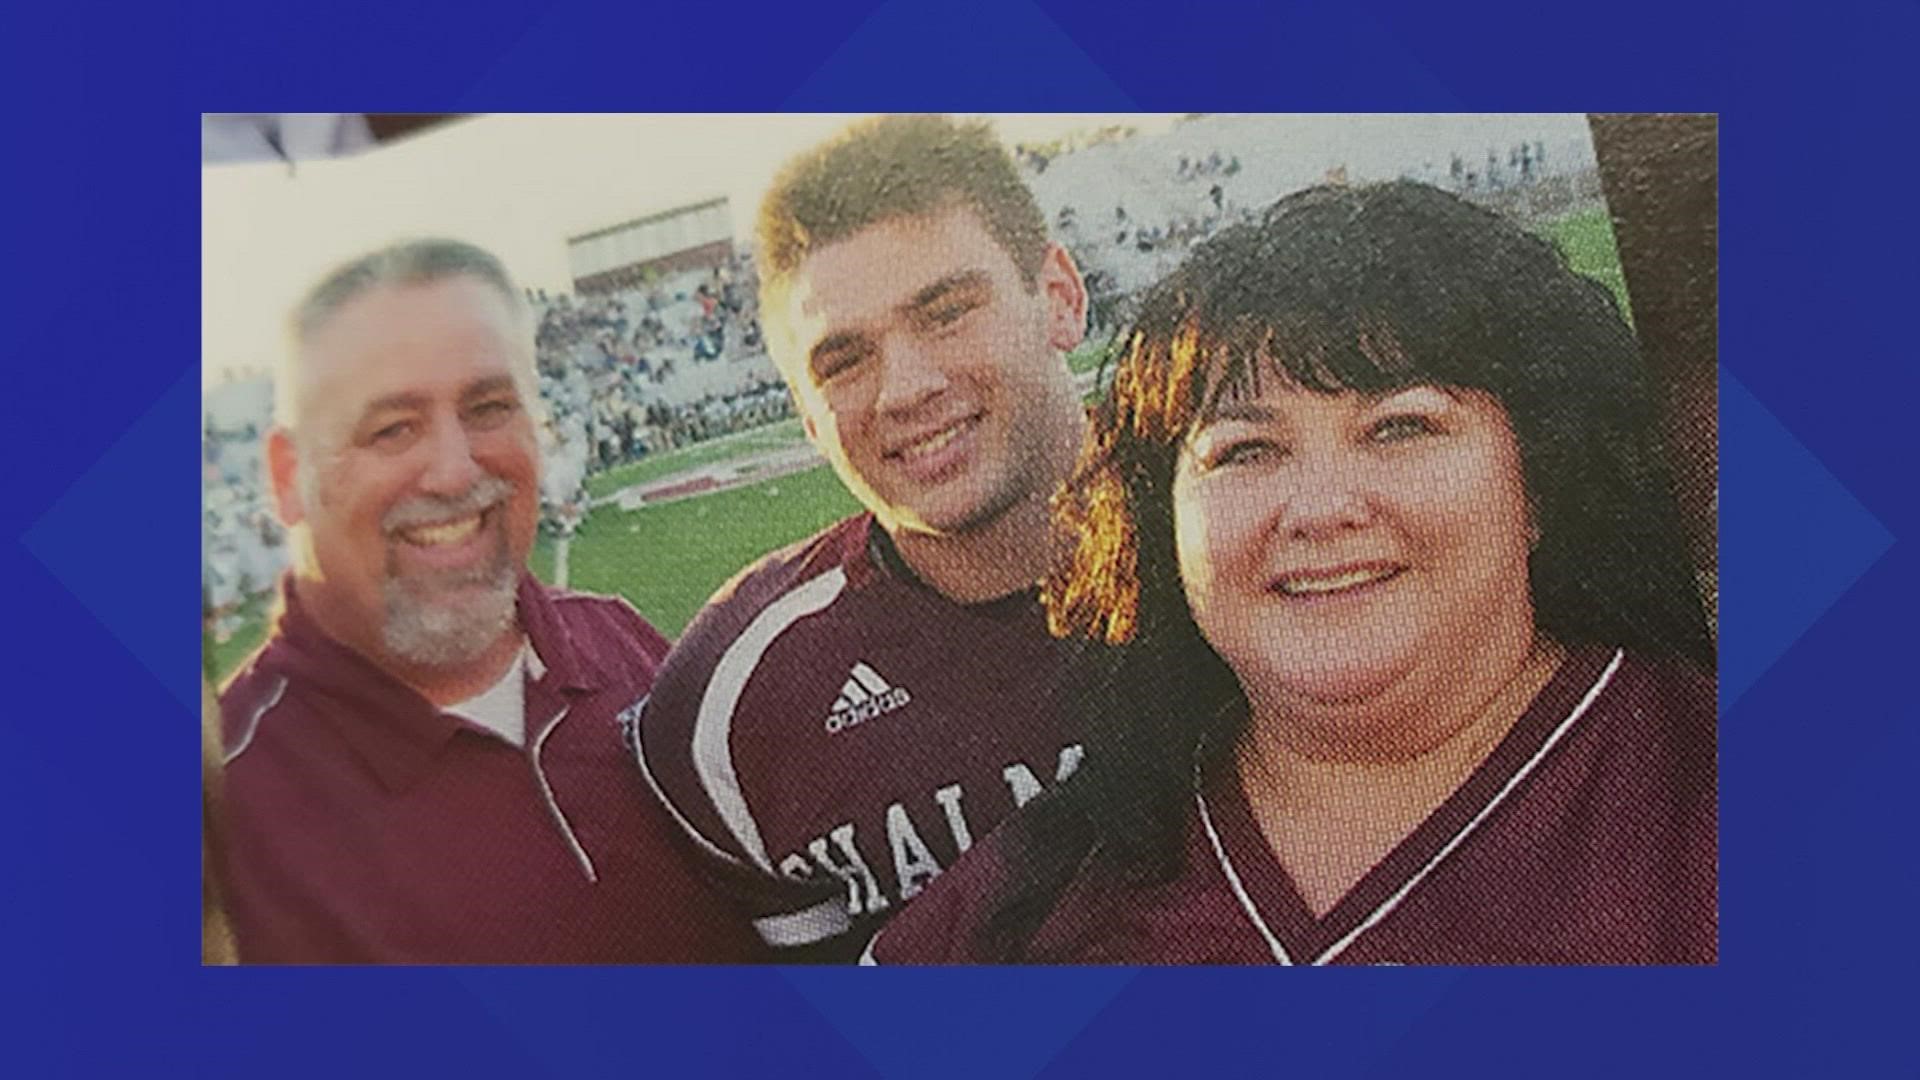 Connor Lambert, a graduate of Chalmette High School, died from injuries suffered in the EF-3 tornado that tore through Arabi, Louisiana Tuesday night.